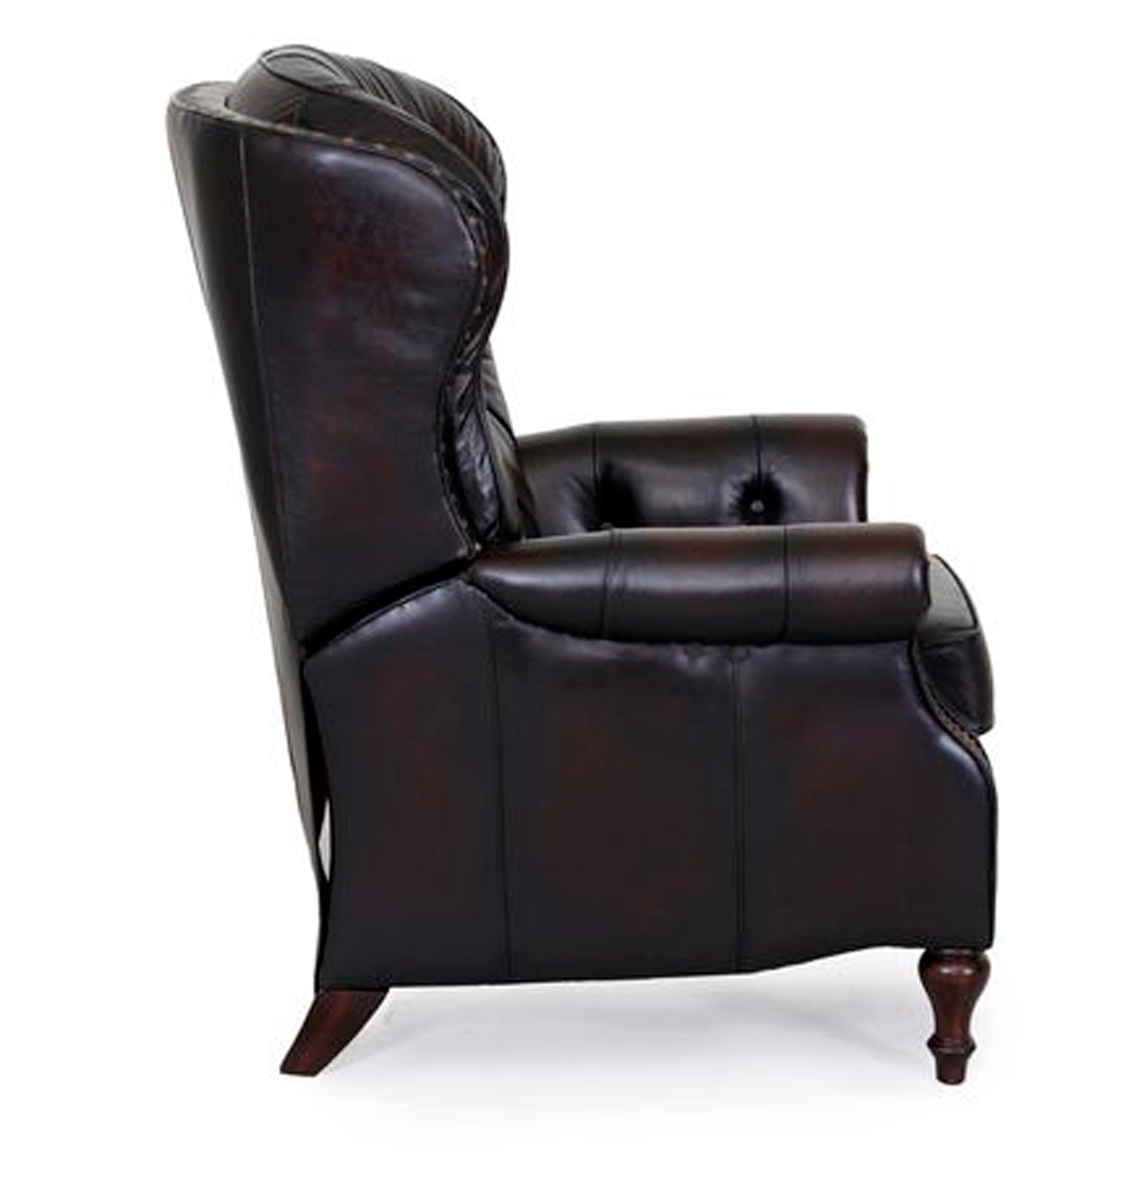 Barcalounger Kendall II Vintage Reserve Power Recliner Chair - Stetson Coffee